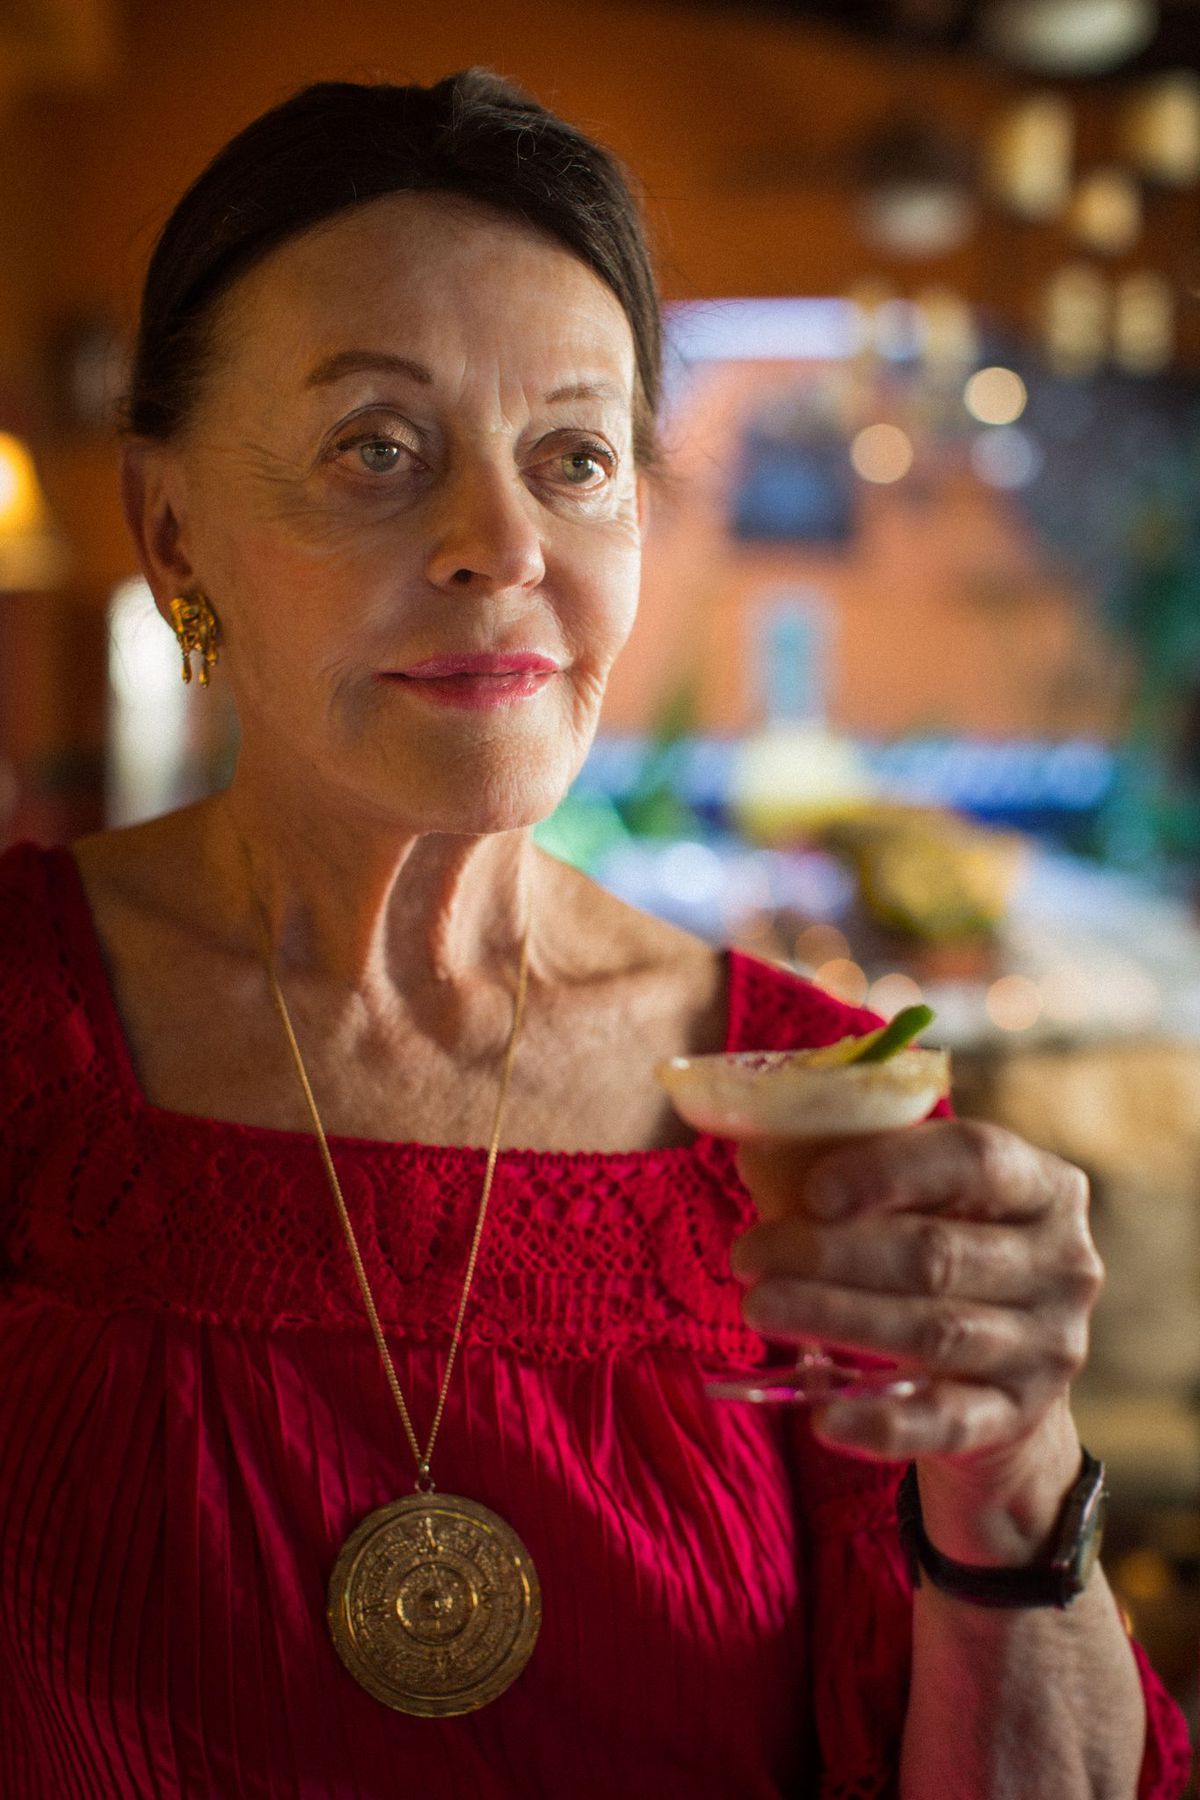 Barbara Hansen holding up a cocktail in 2014.